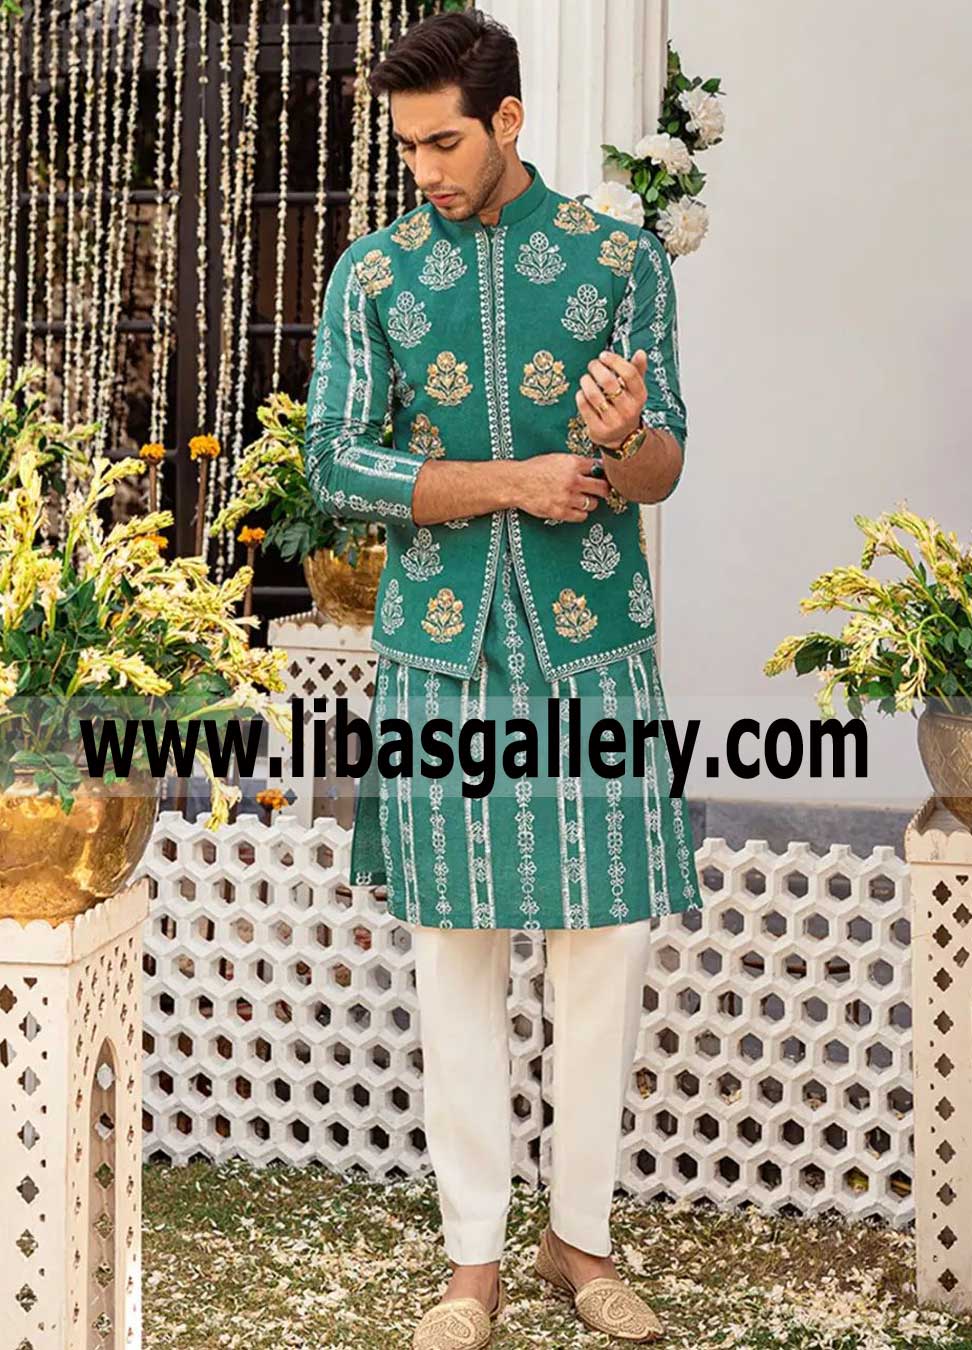 spanish green block print waistcoat with embellished motifs suitable for mehndi and dinner party event Bangladesh USA UK